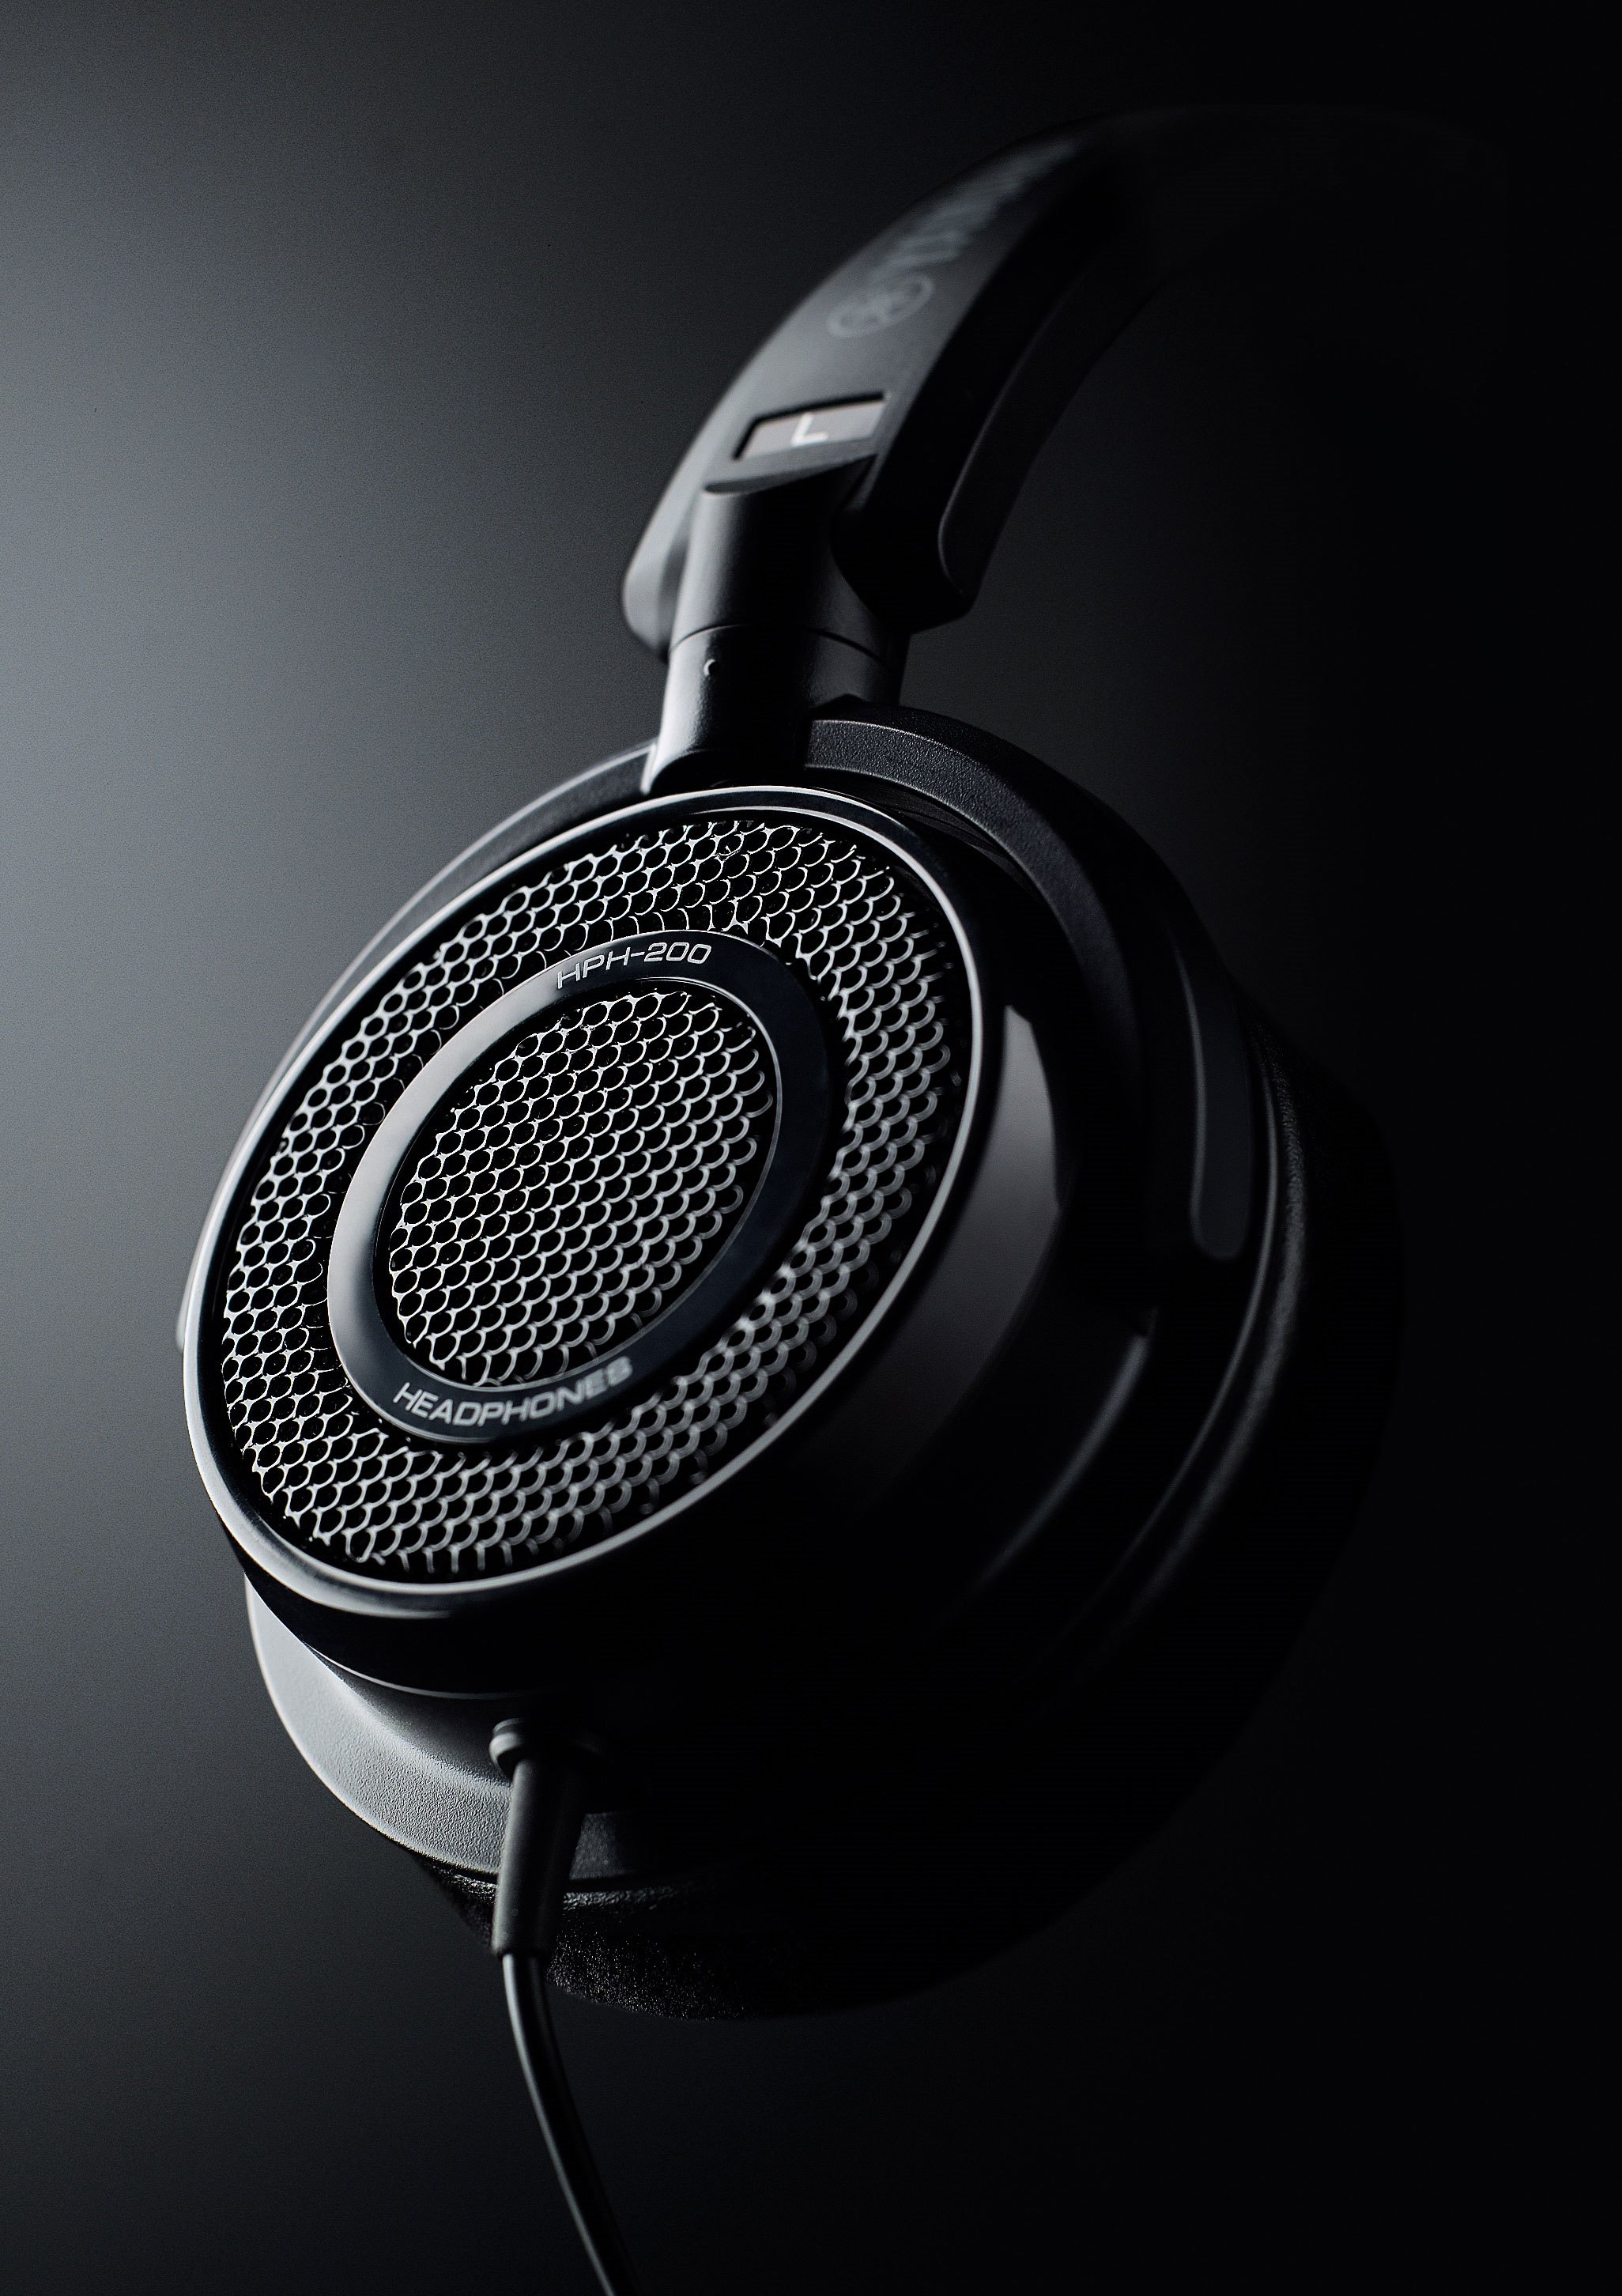 HPH-200 - Overview - Headphones - Audio & Visual - Products 